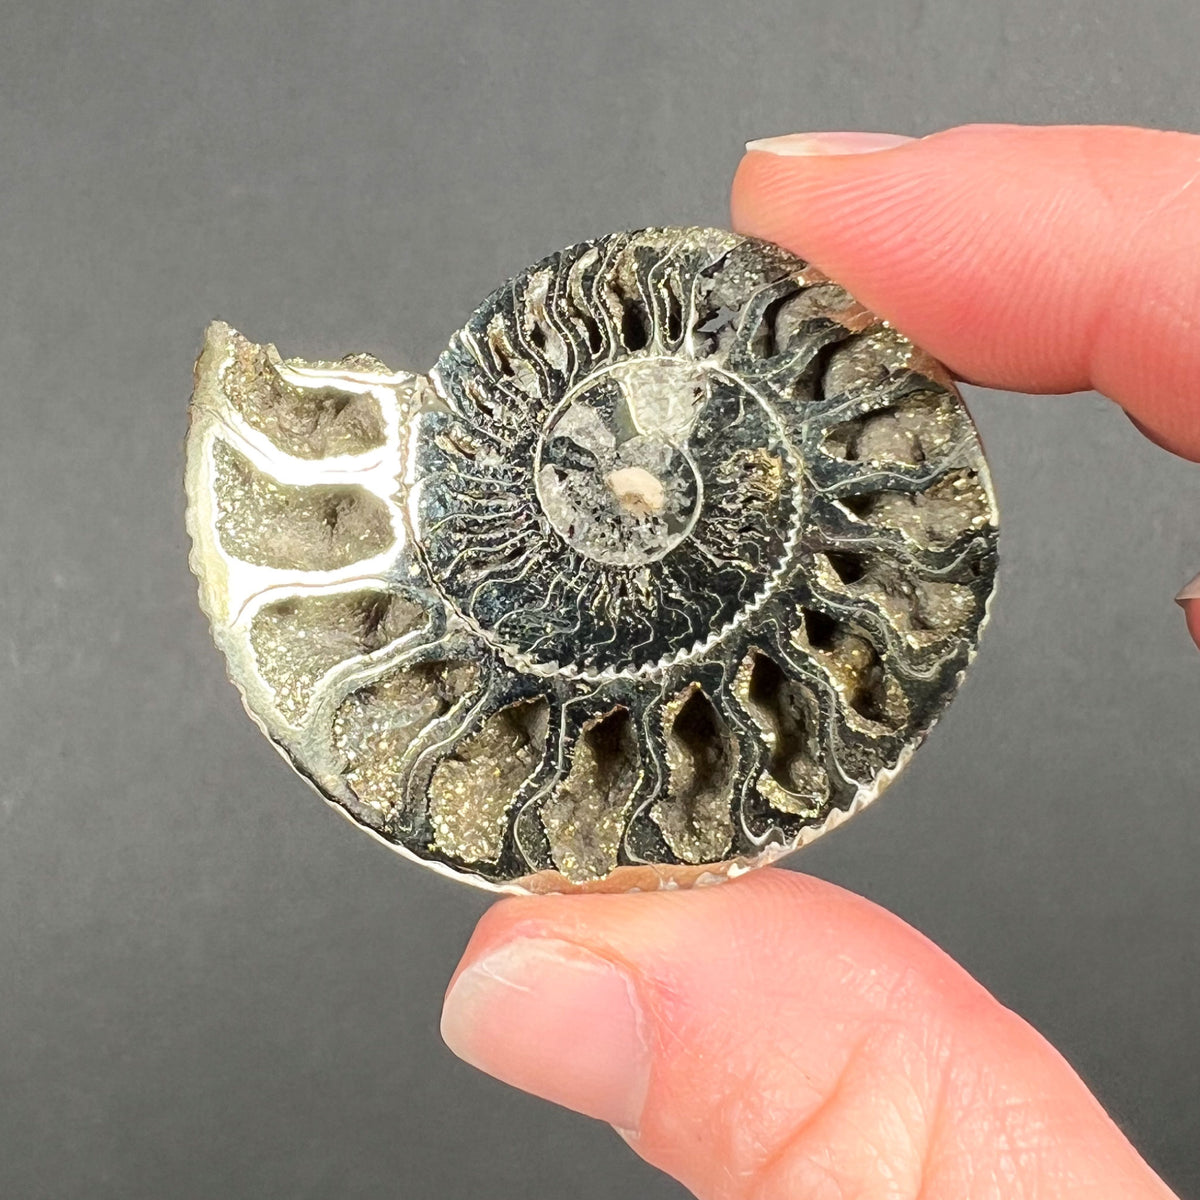 Pyritized Ammonite Shell from Russia